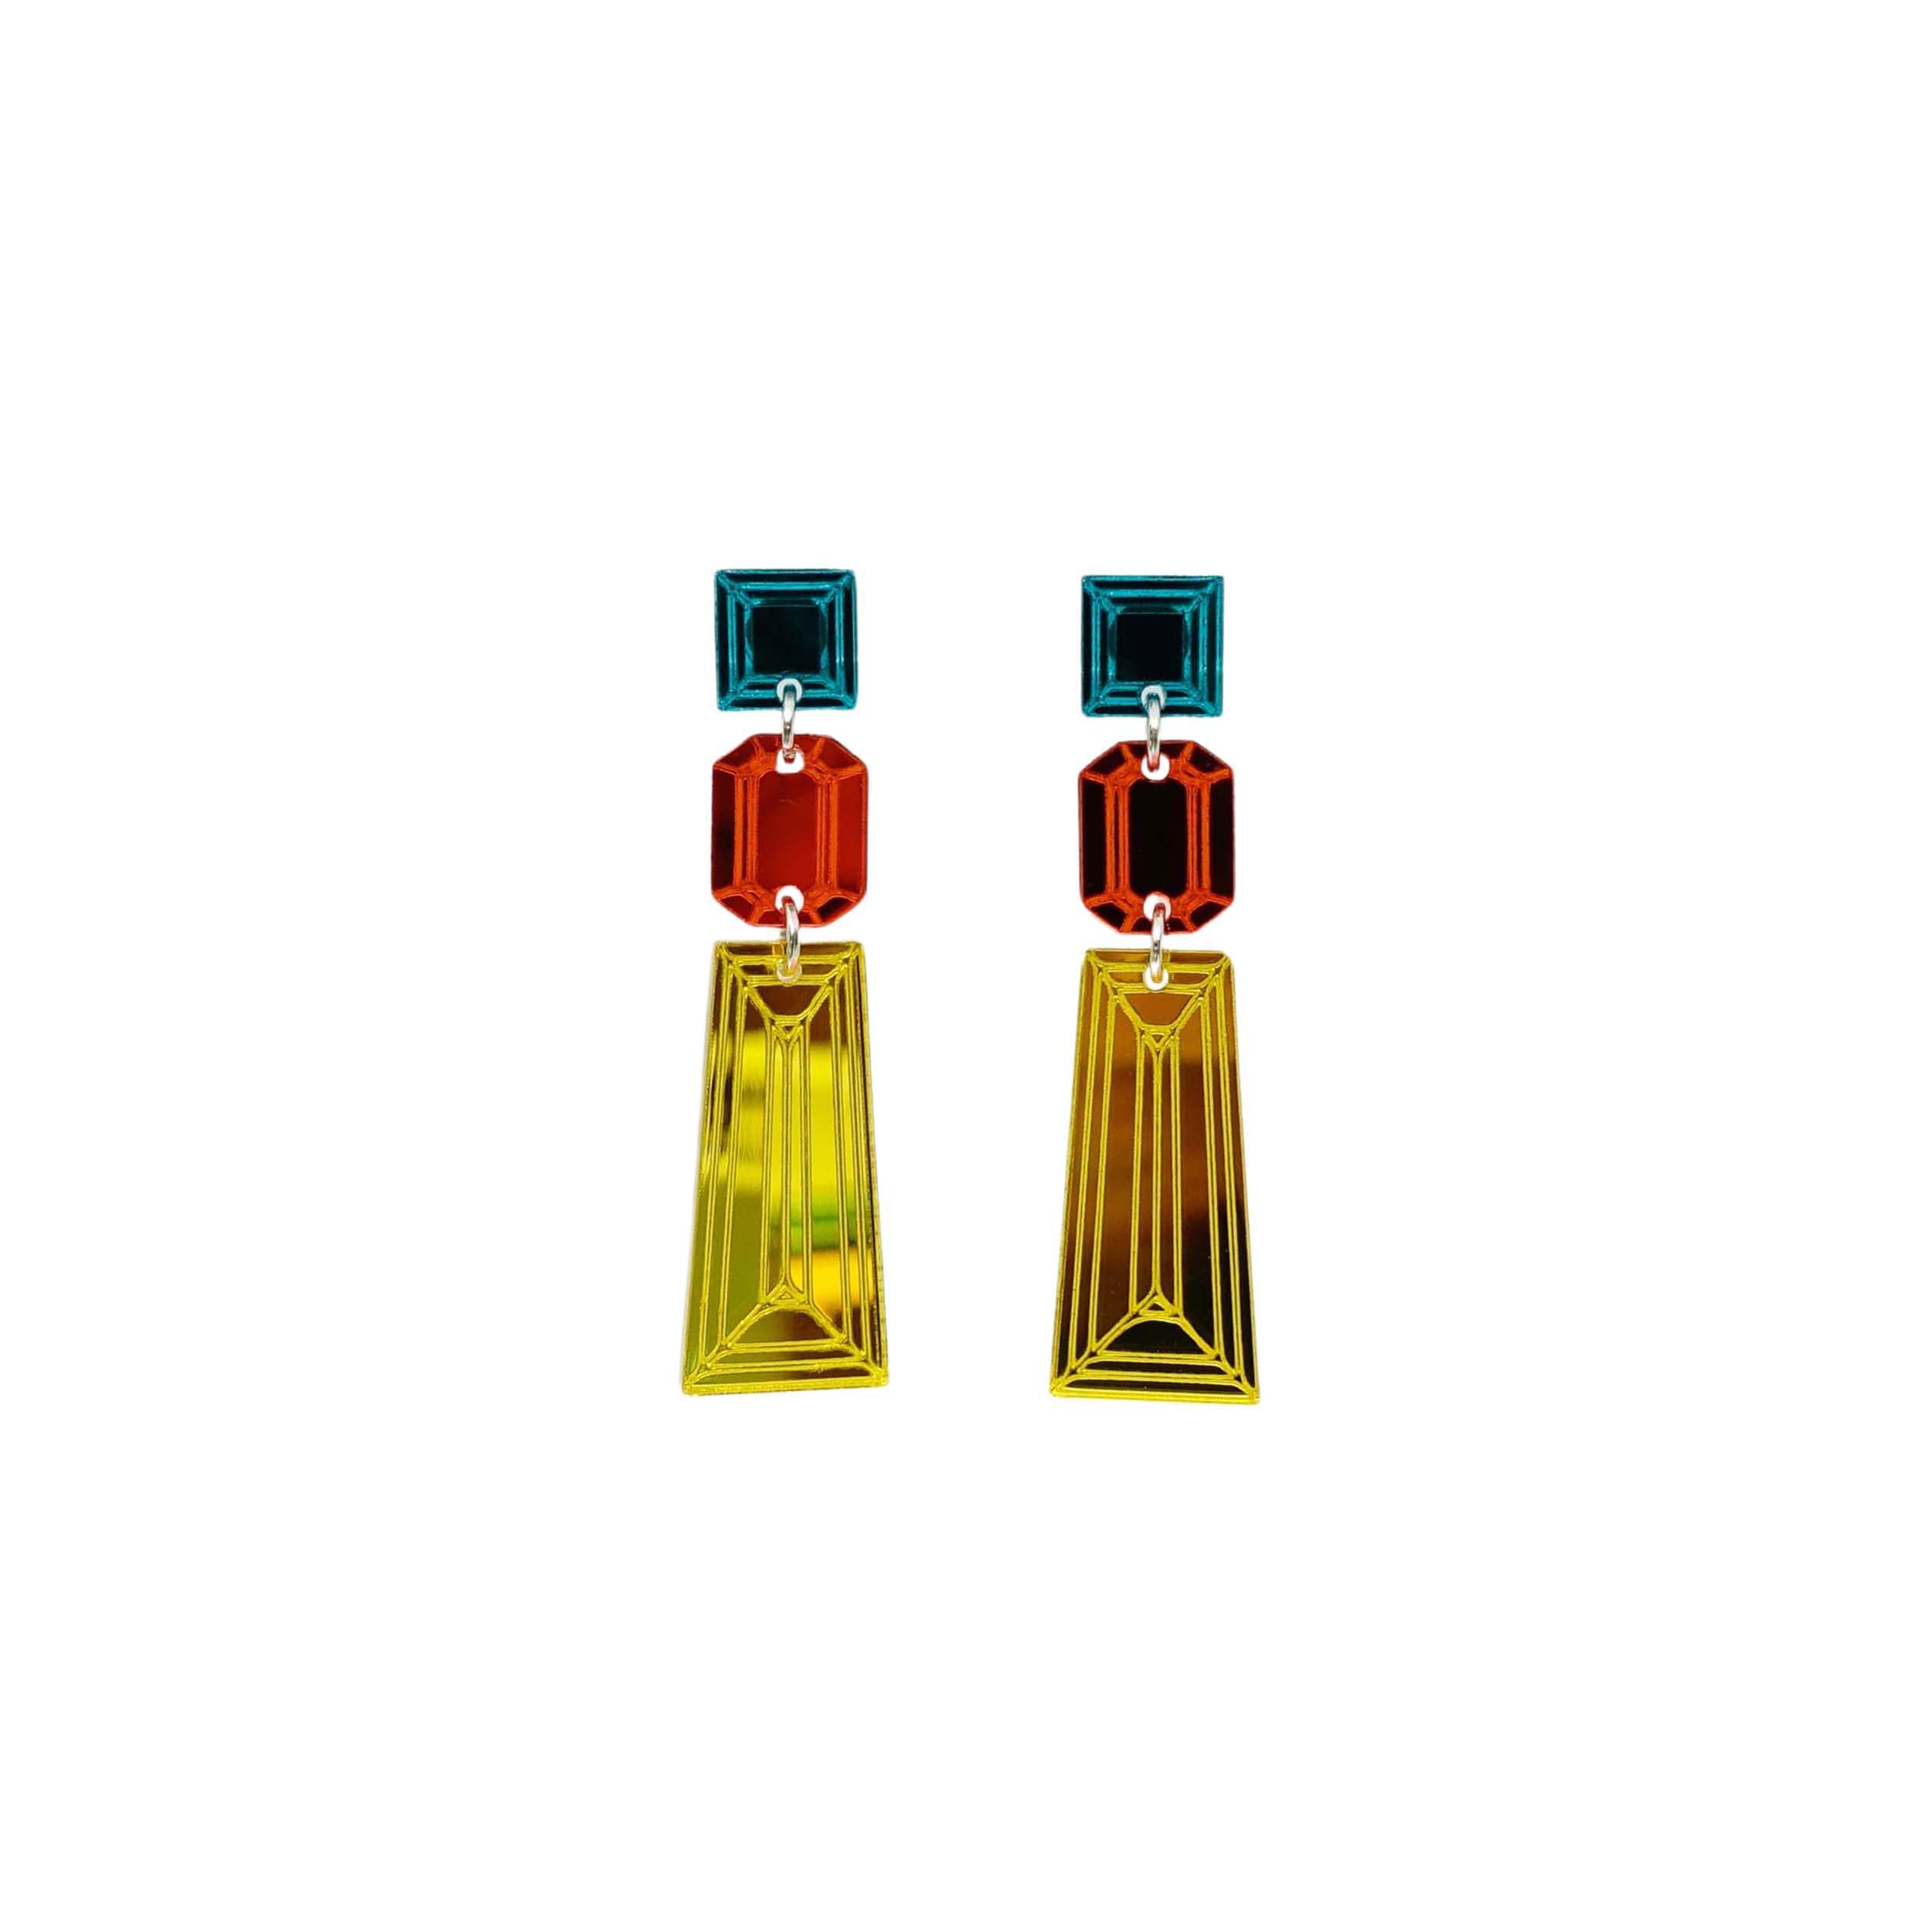 Long Deco drop earrings in yellow, flame and teal, shown hanging against a white background. 